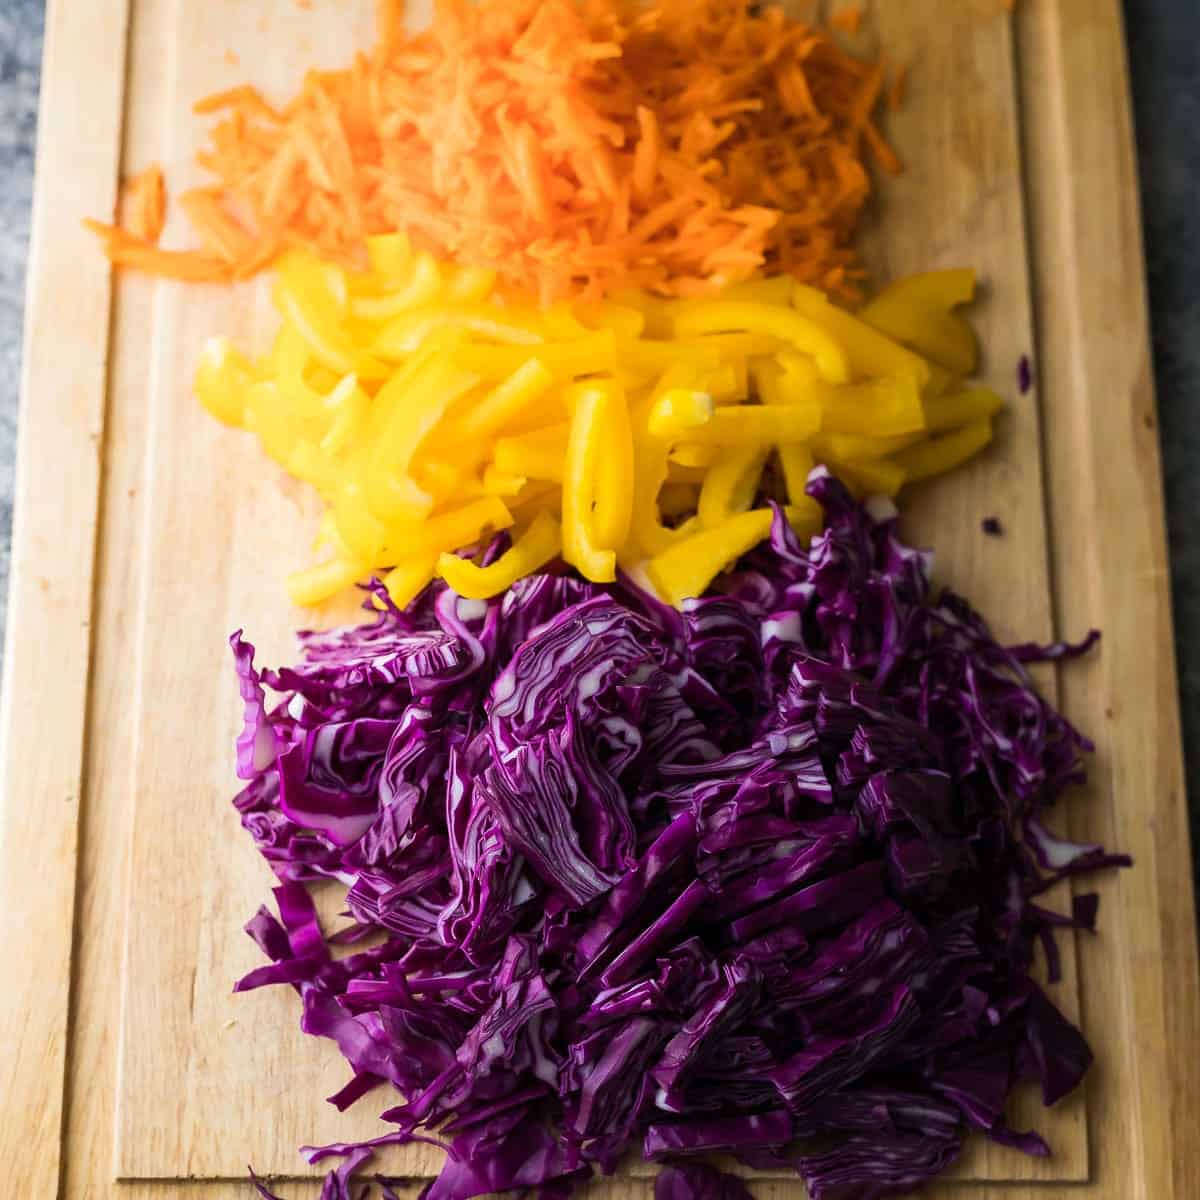 wood cutting board with shredded purple cabbage, sliced yellow pepper, and shredded carrots